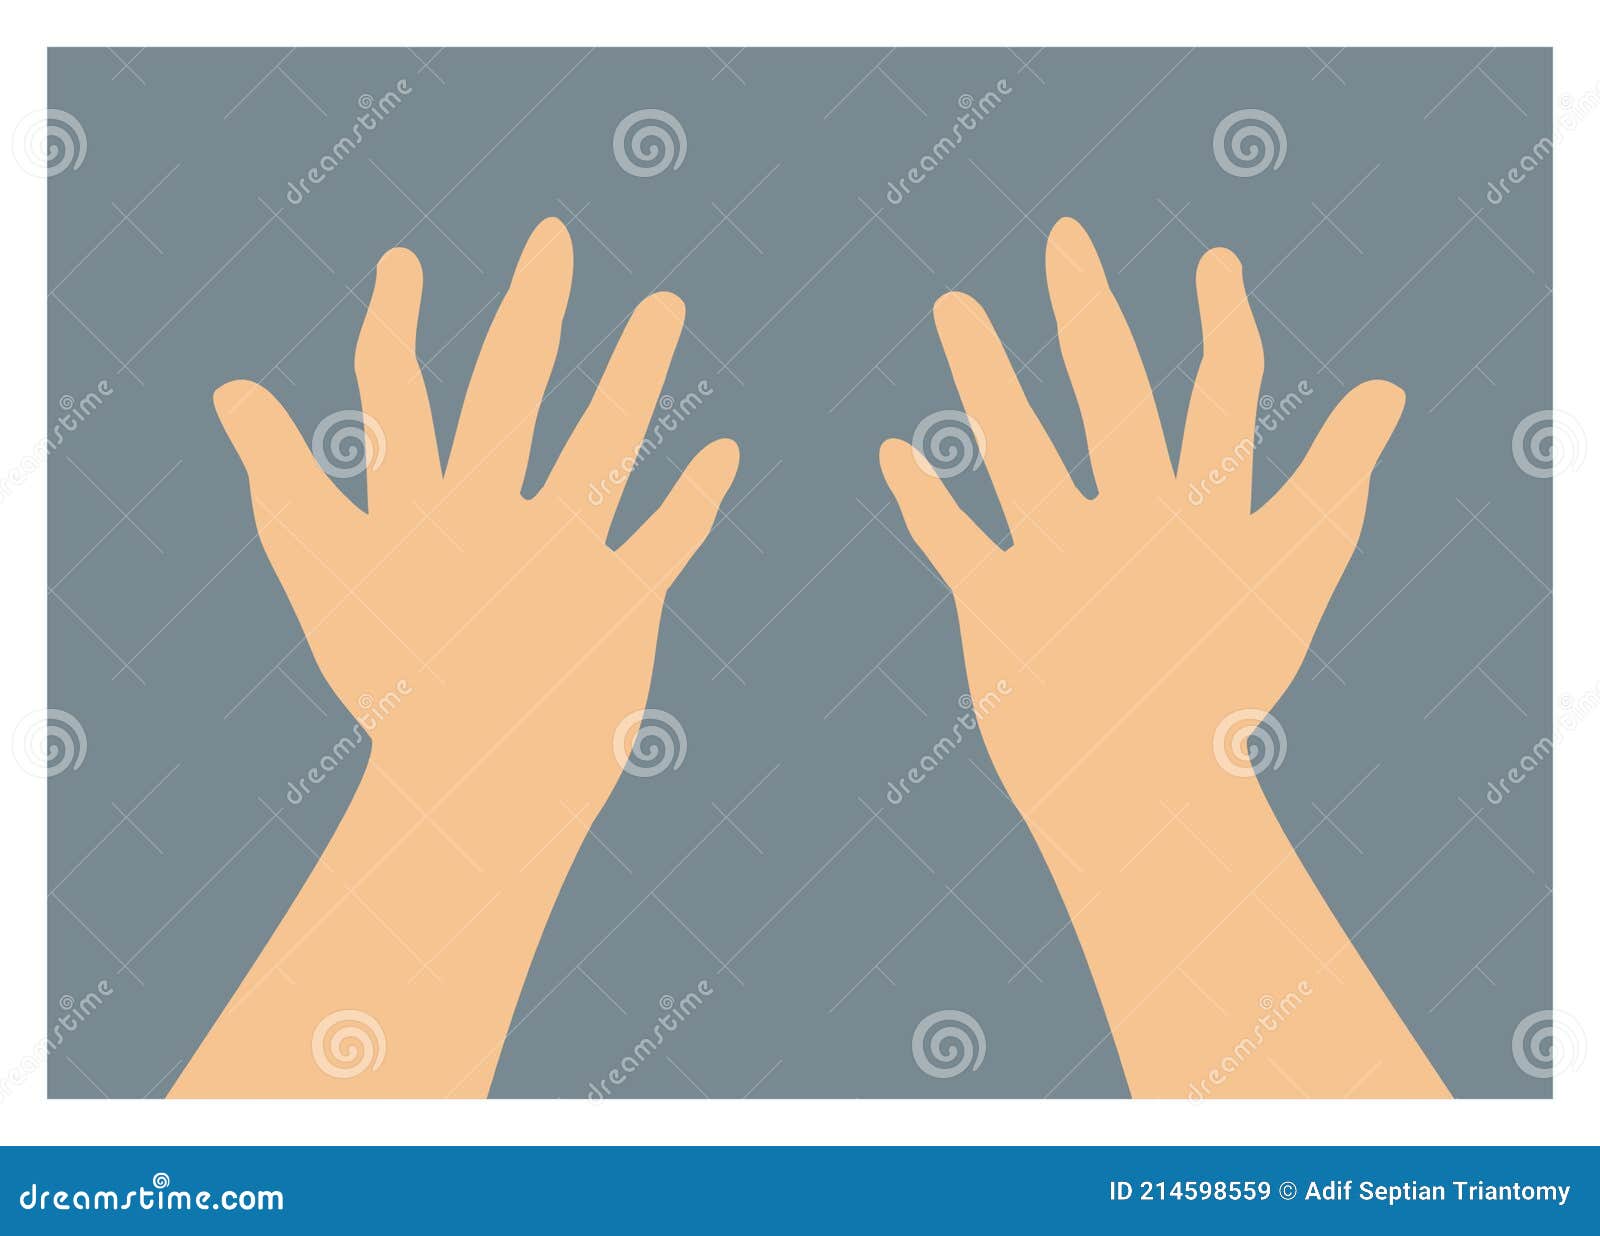 Hand Pose Stock Photos, Images and Backgrounds for Free Download